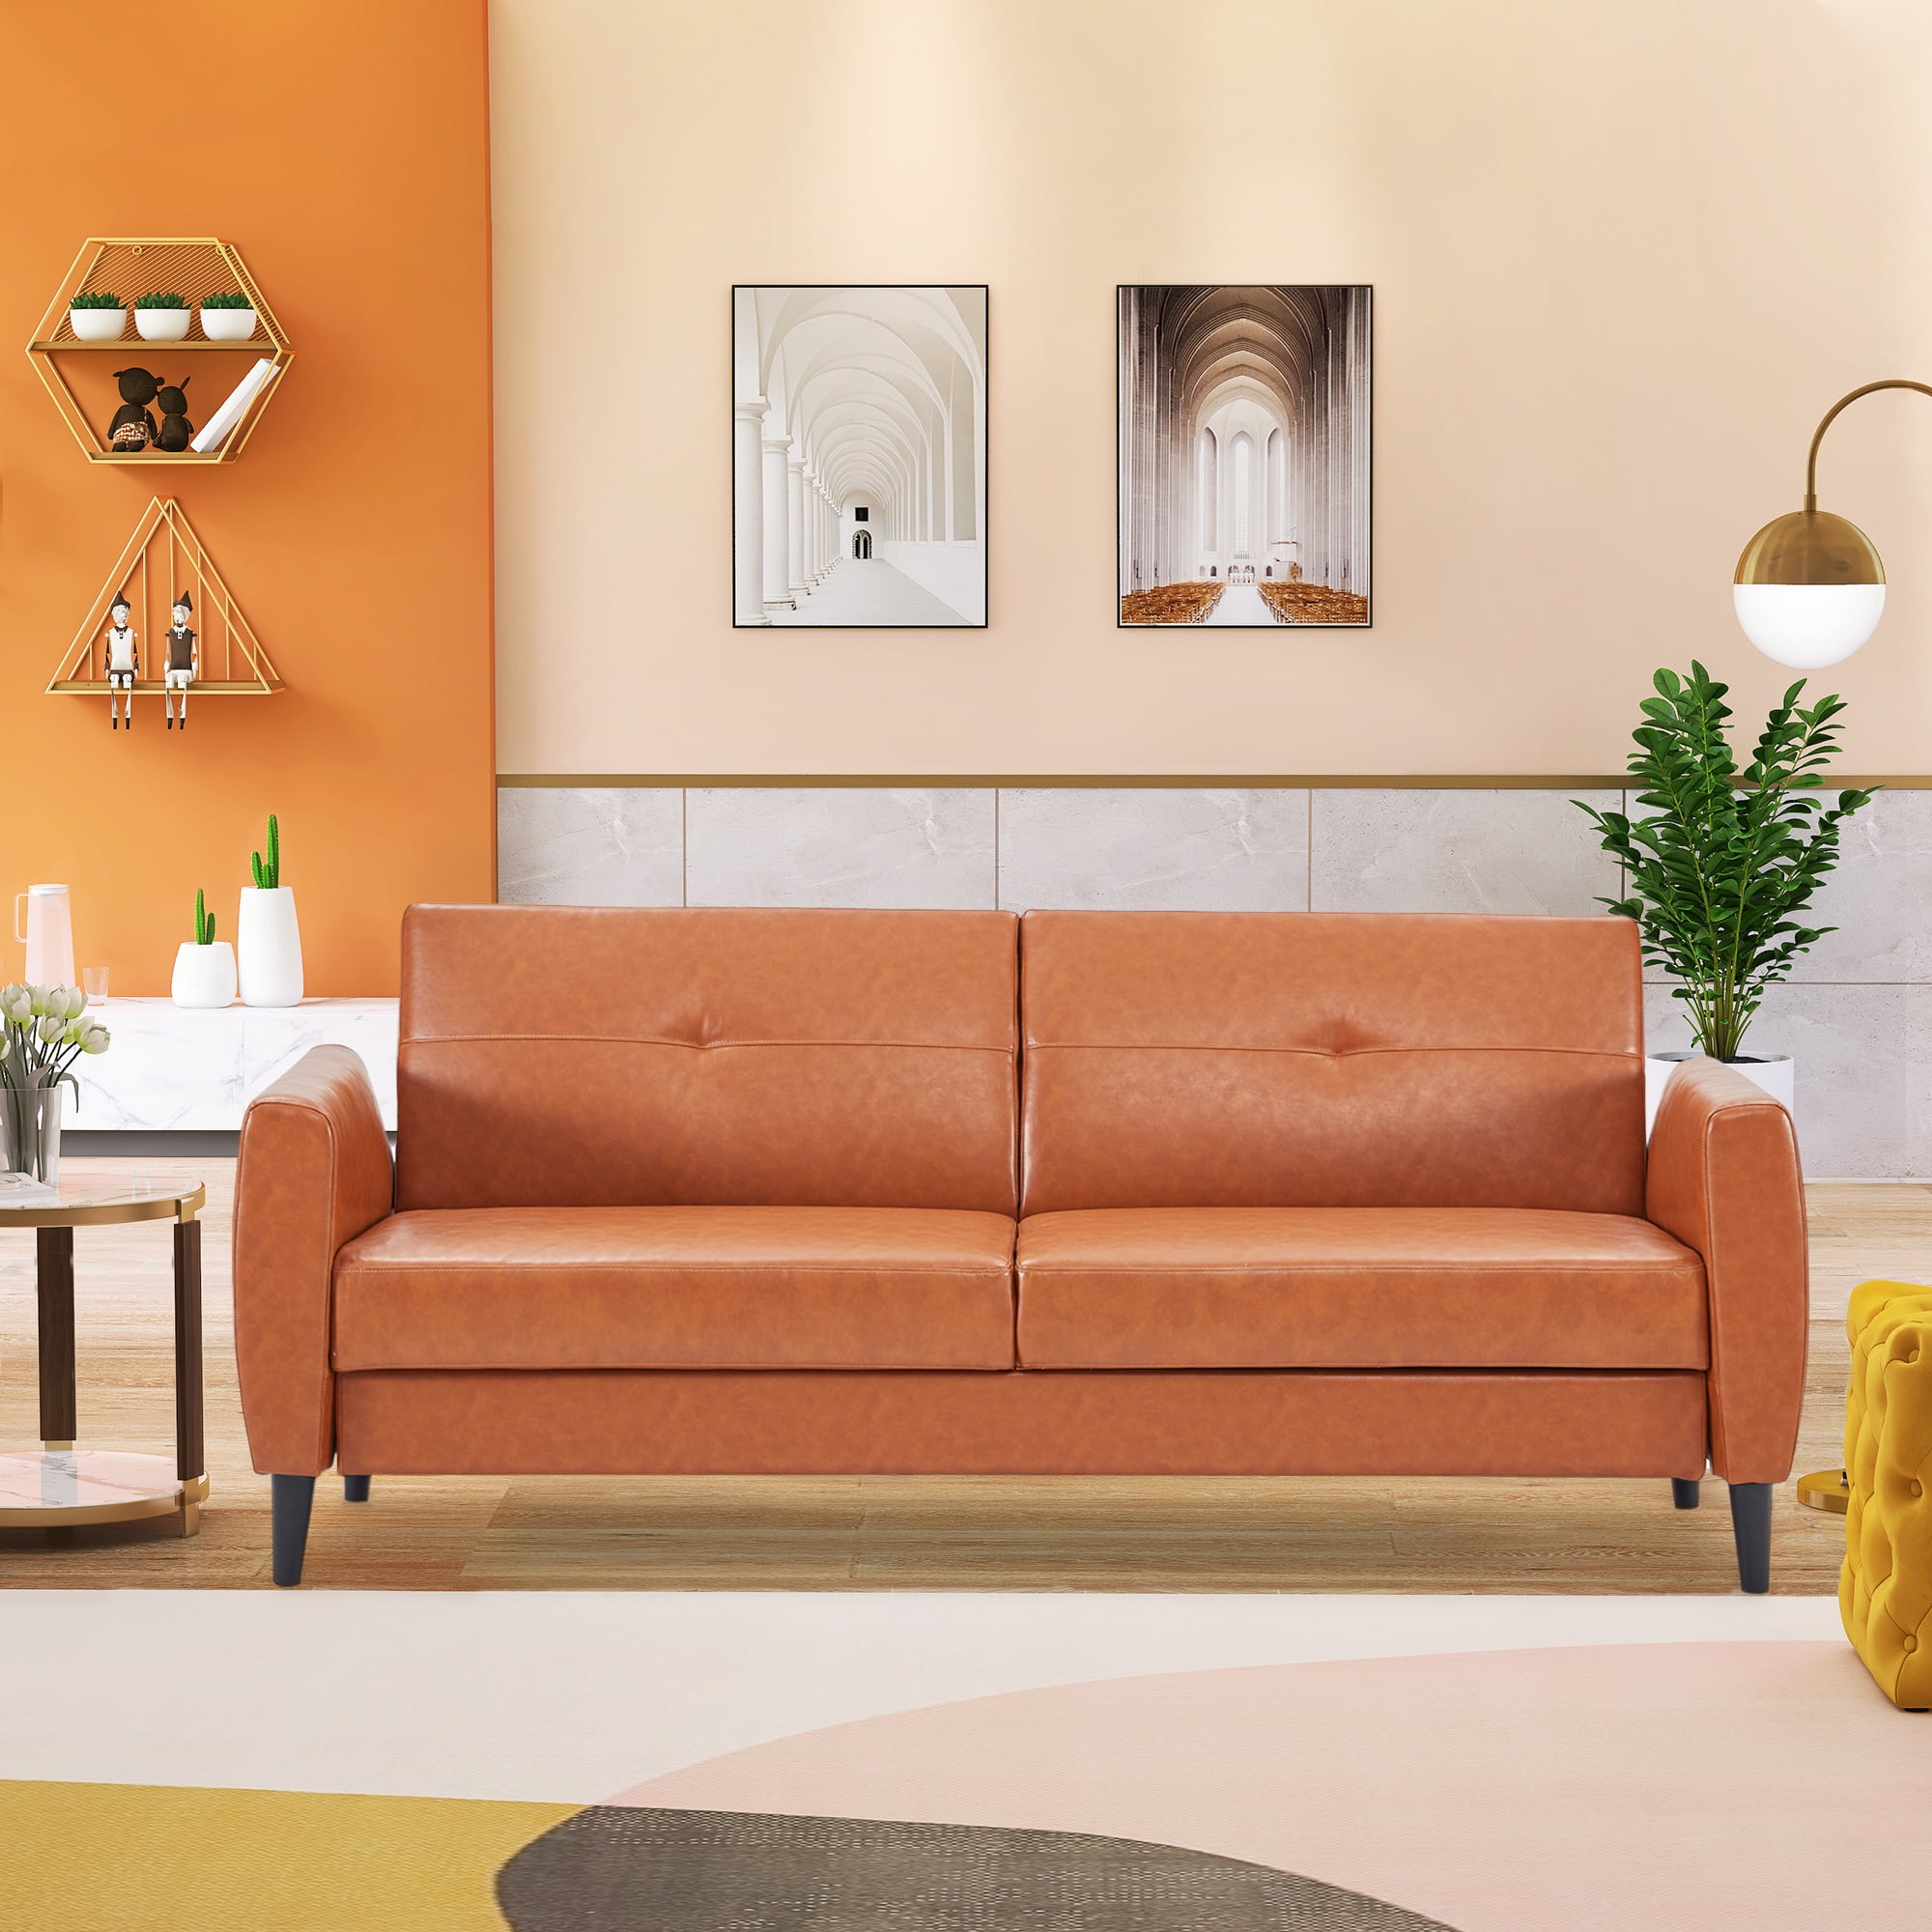 Futon Sofa Bed Couch Sleeper, Tan Leather Sleeper Couch